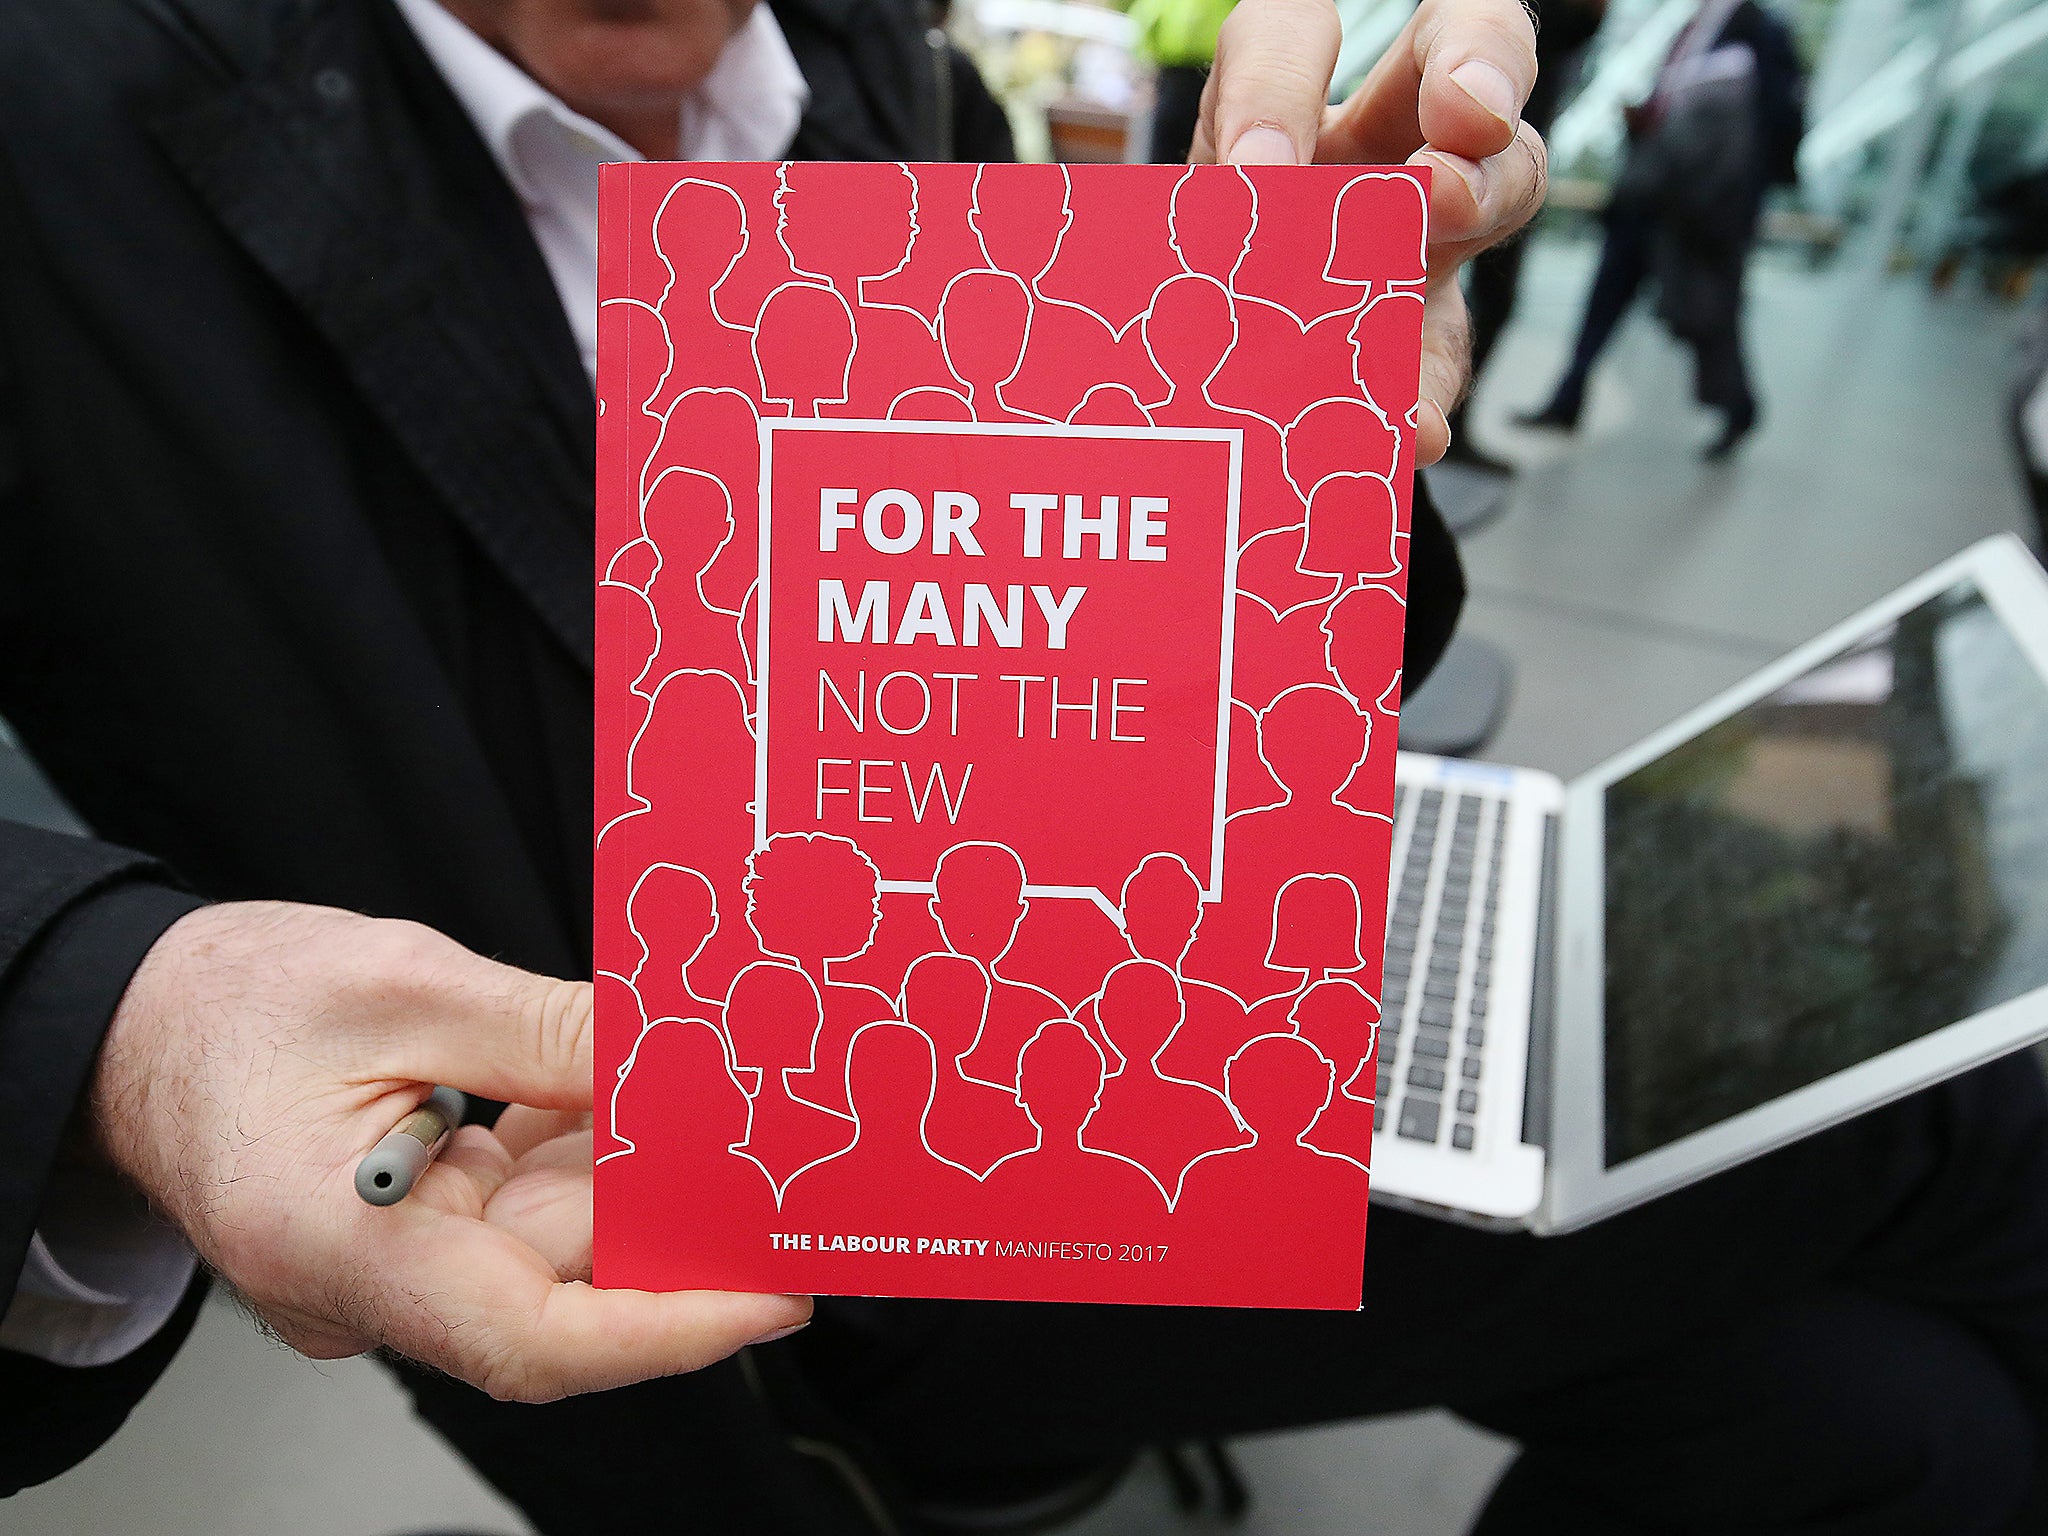 Jeremy Corbyn's Labour Party manifesto has received praise from voters following its publication this week